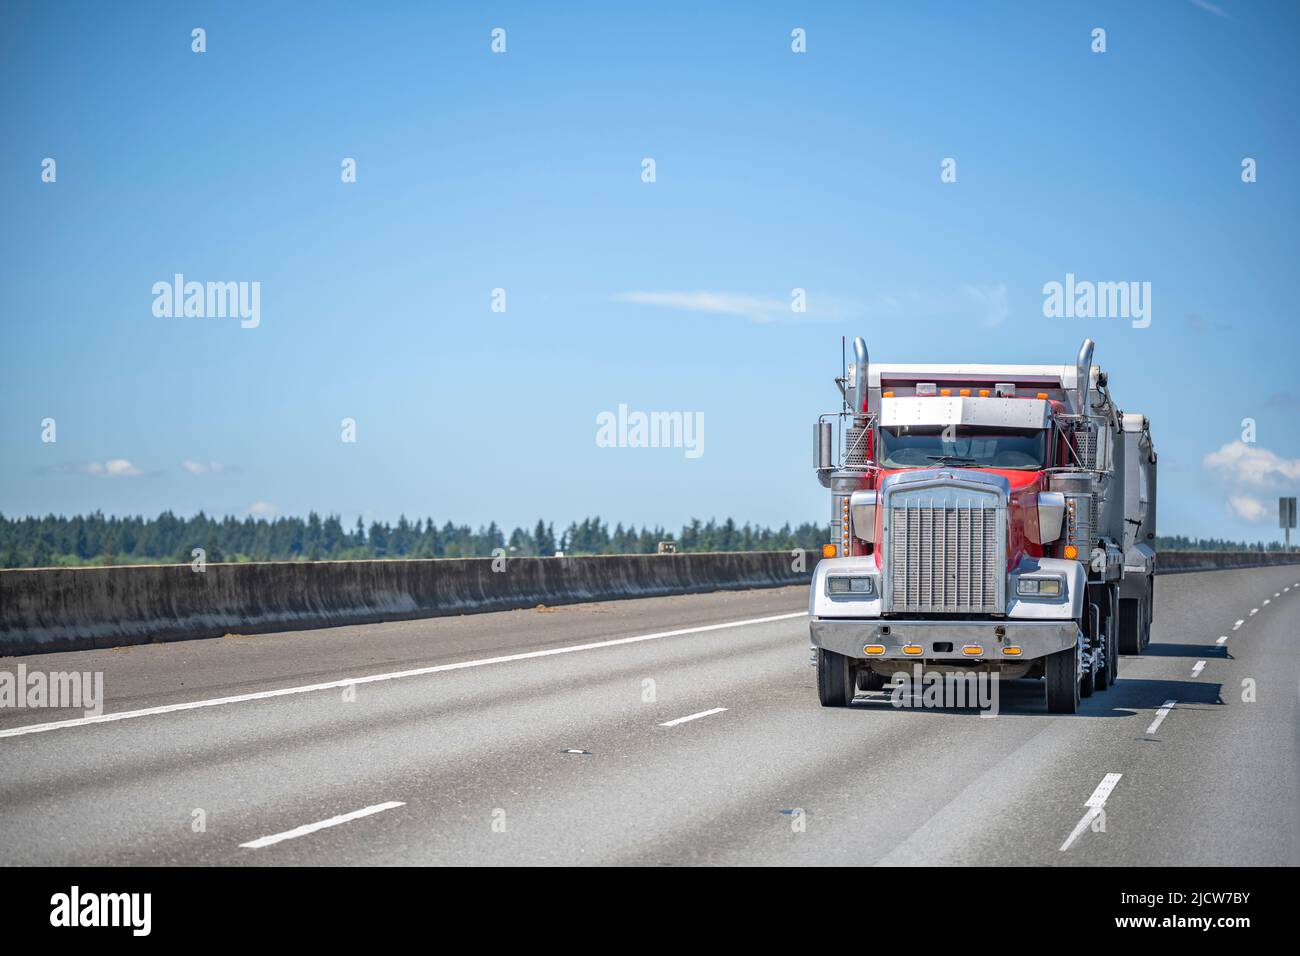 Powerful red big rig bonnet industrial tipper truck tractor transporting commercial cargo in two tip trailers driving for delivery on the wide multili Stock Photo